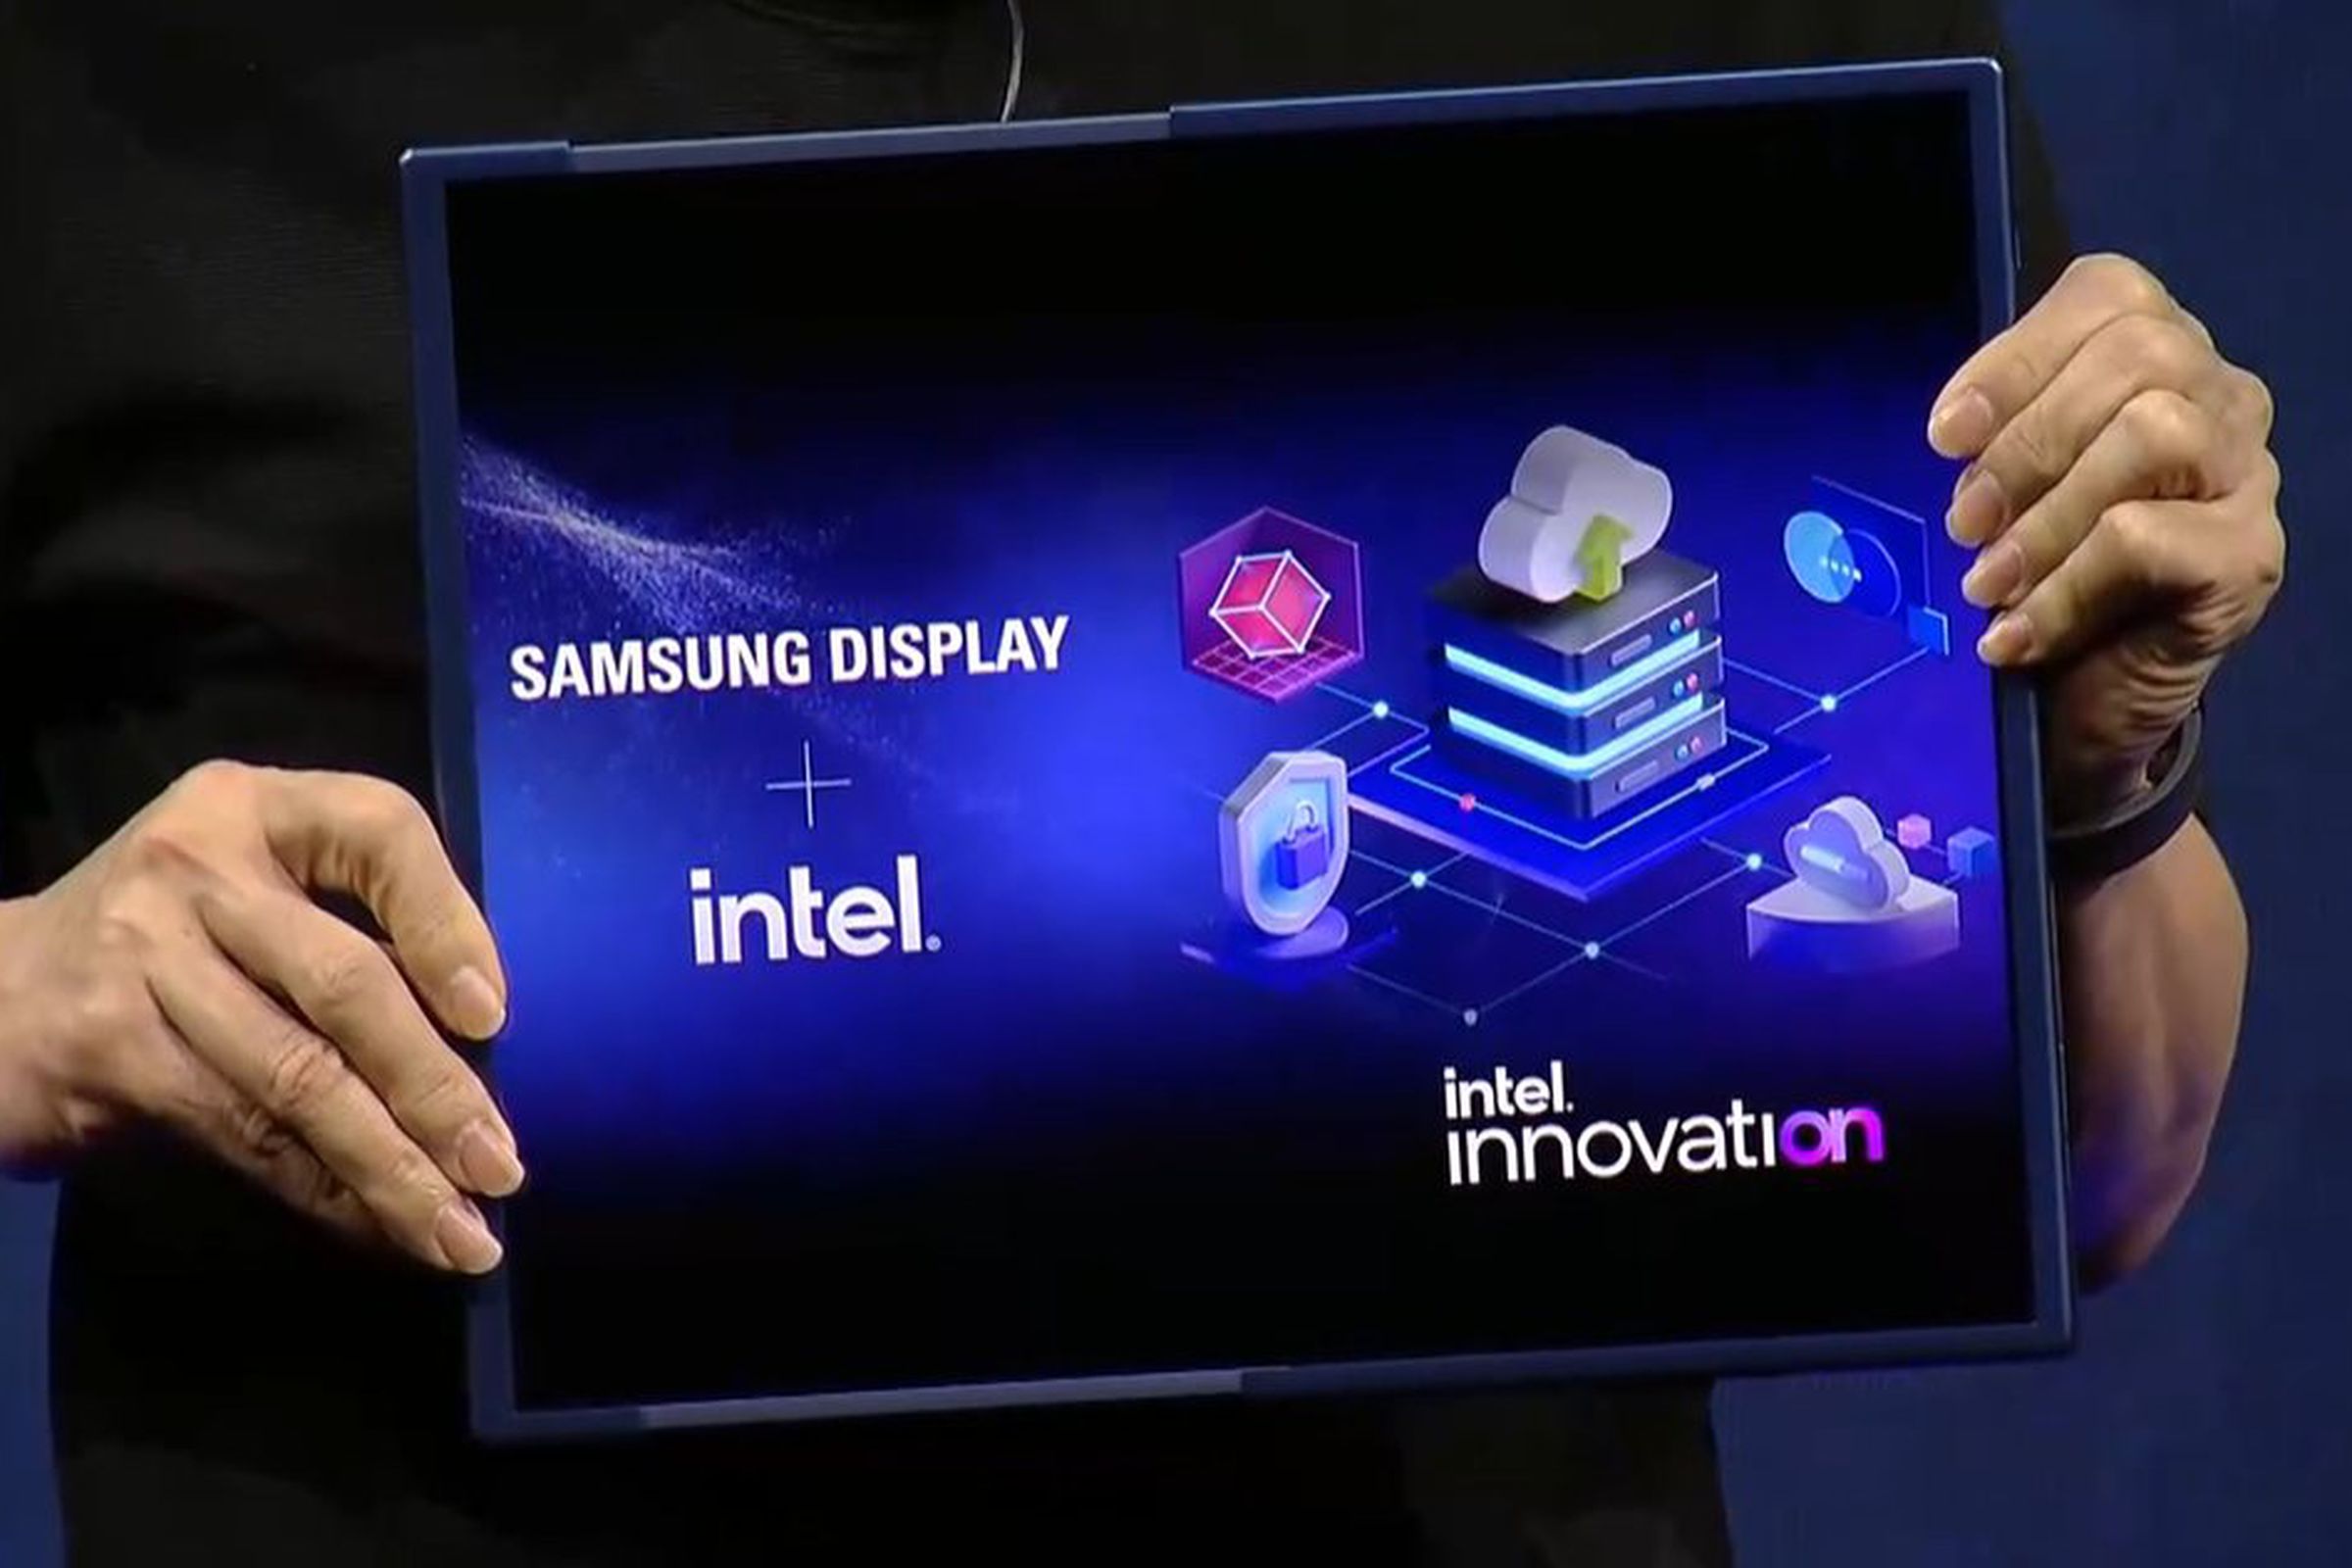 A PC with flexible display that slides into place